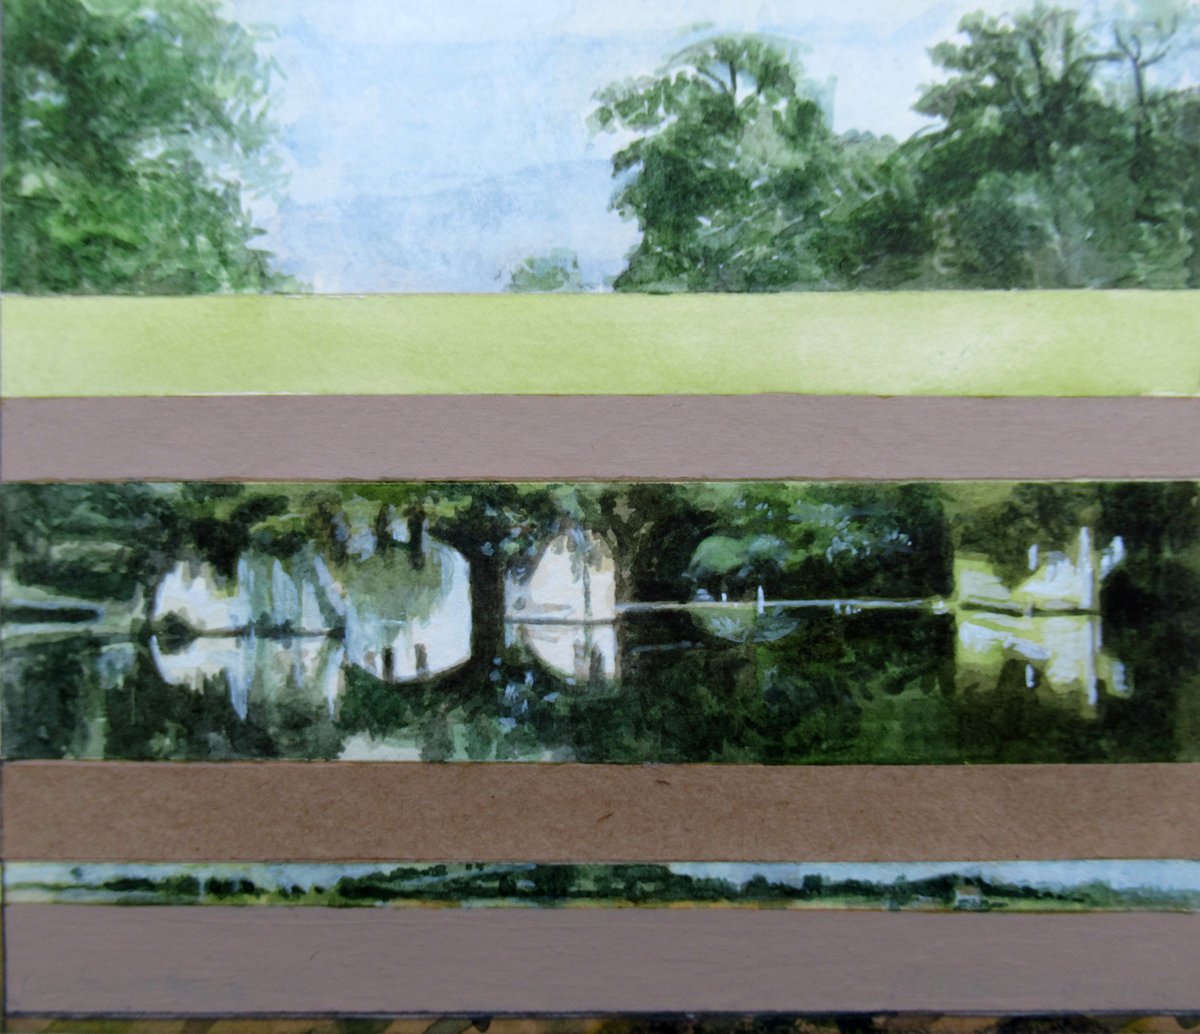 Sketchbook pages landscape fragments with reflections #art #ArtistOnTwitter #ArtistOnX #artista #sketches #sketchbook #Sketching #landscapes #contemporaryart #contemporary #watercolour #watercolourpainting #Reflection #trees #England